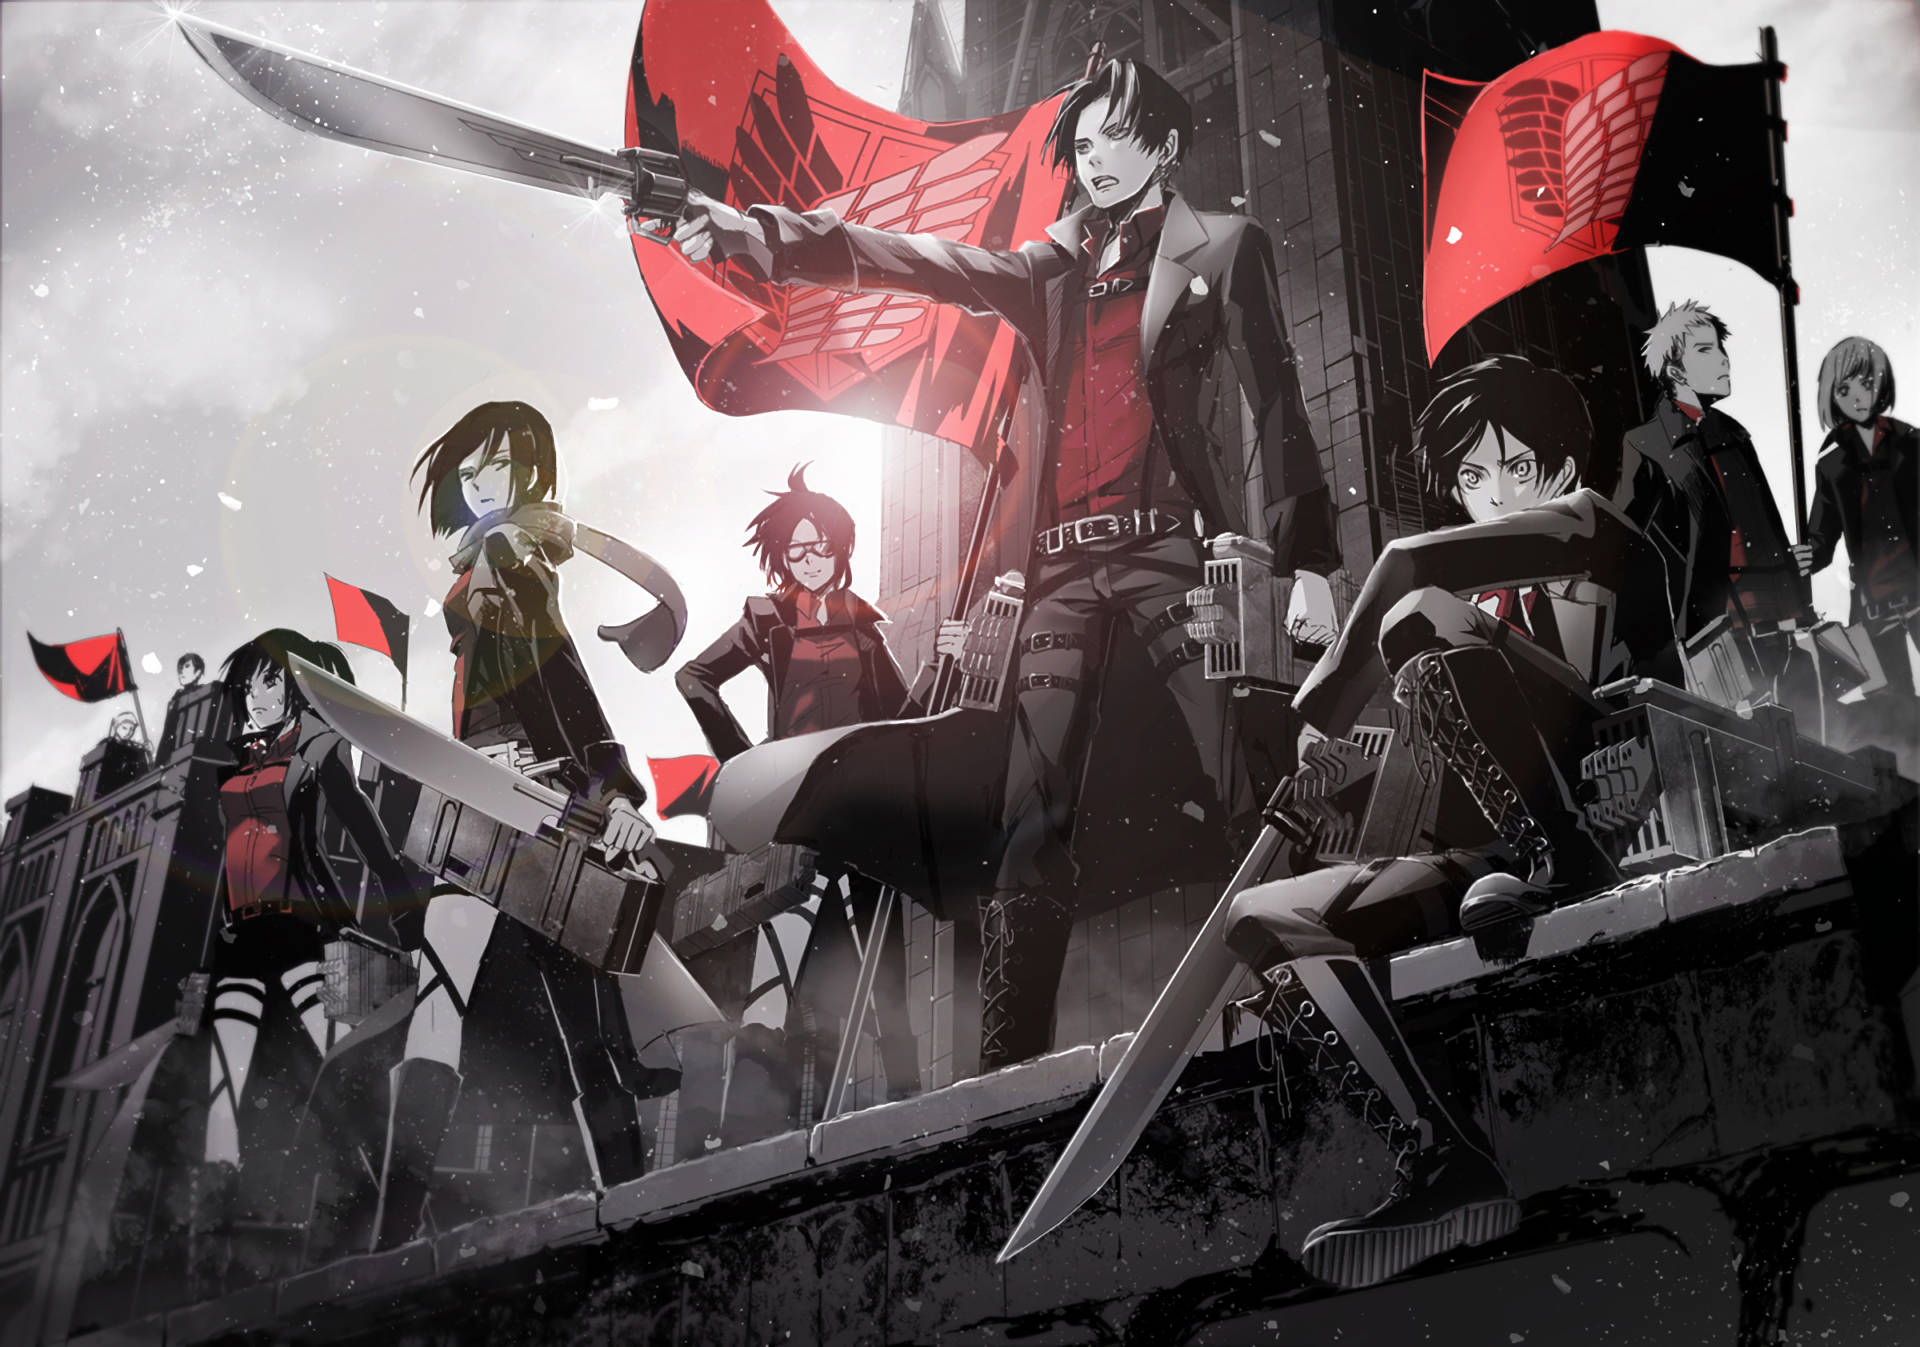 Join the Survey Corps and Fight Back Against the Titans Wallpaper